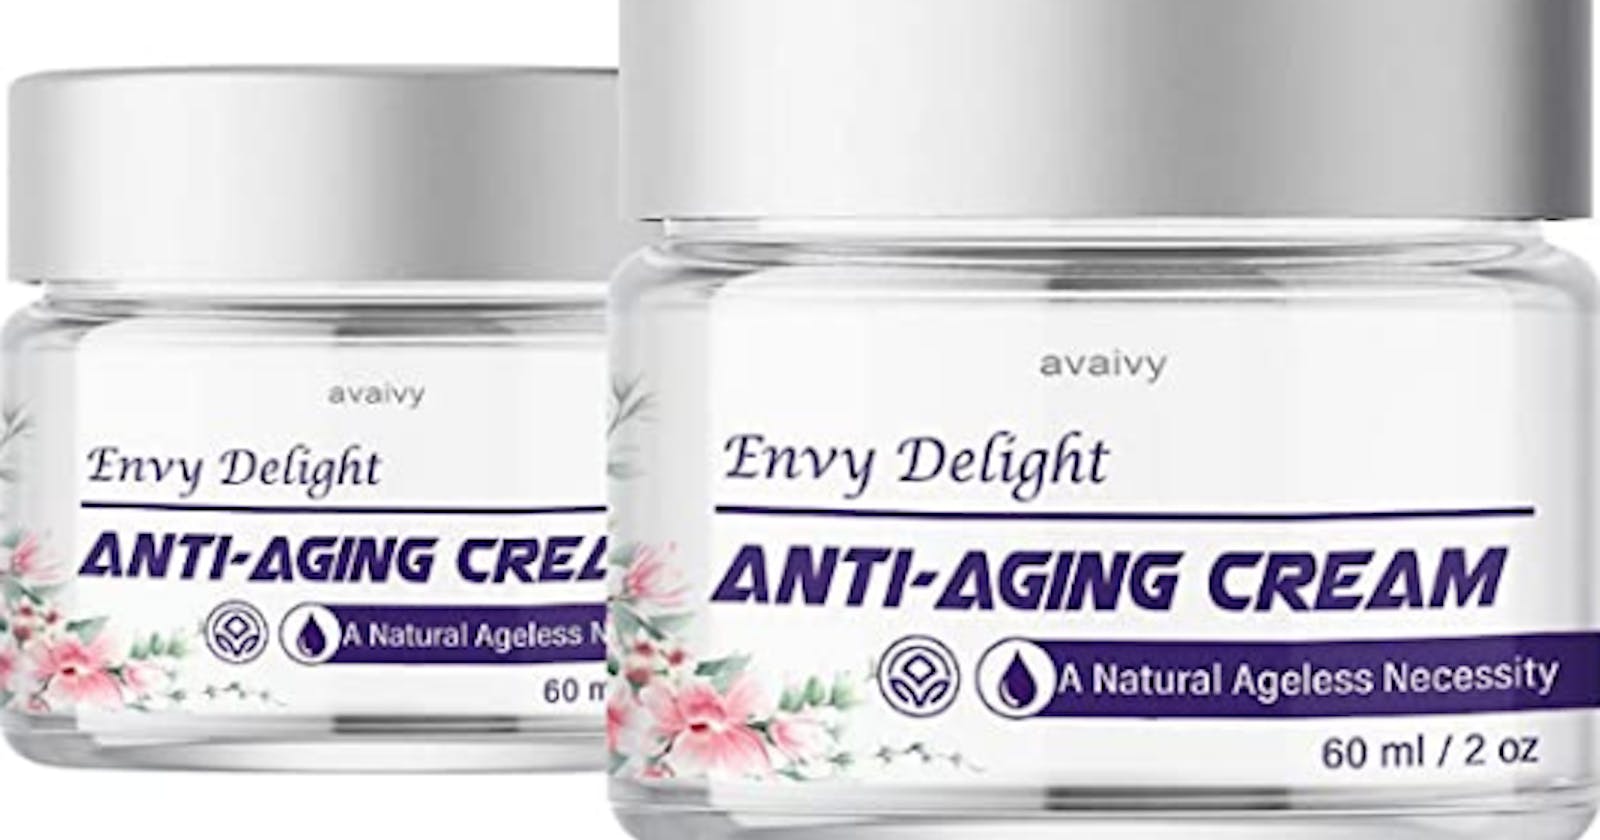 EnvyDelight Skin Cream Repair and Protect Your Beauty! Shocking Price 2023!